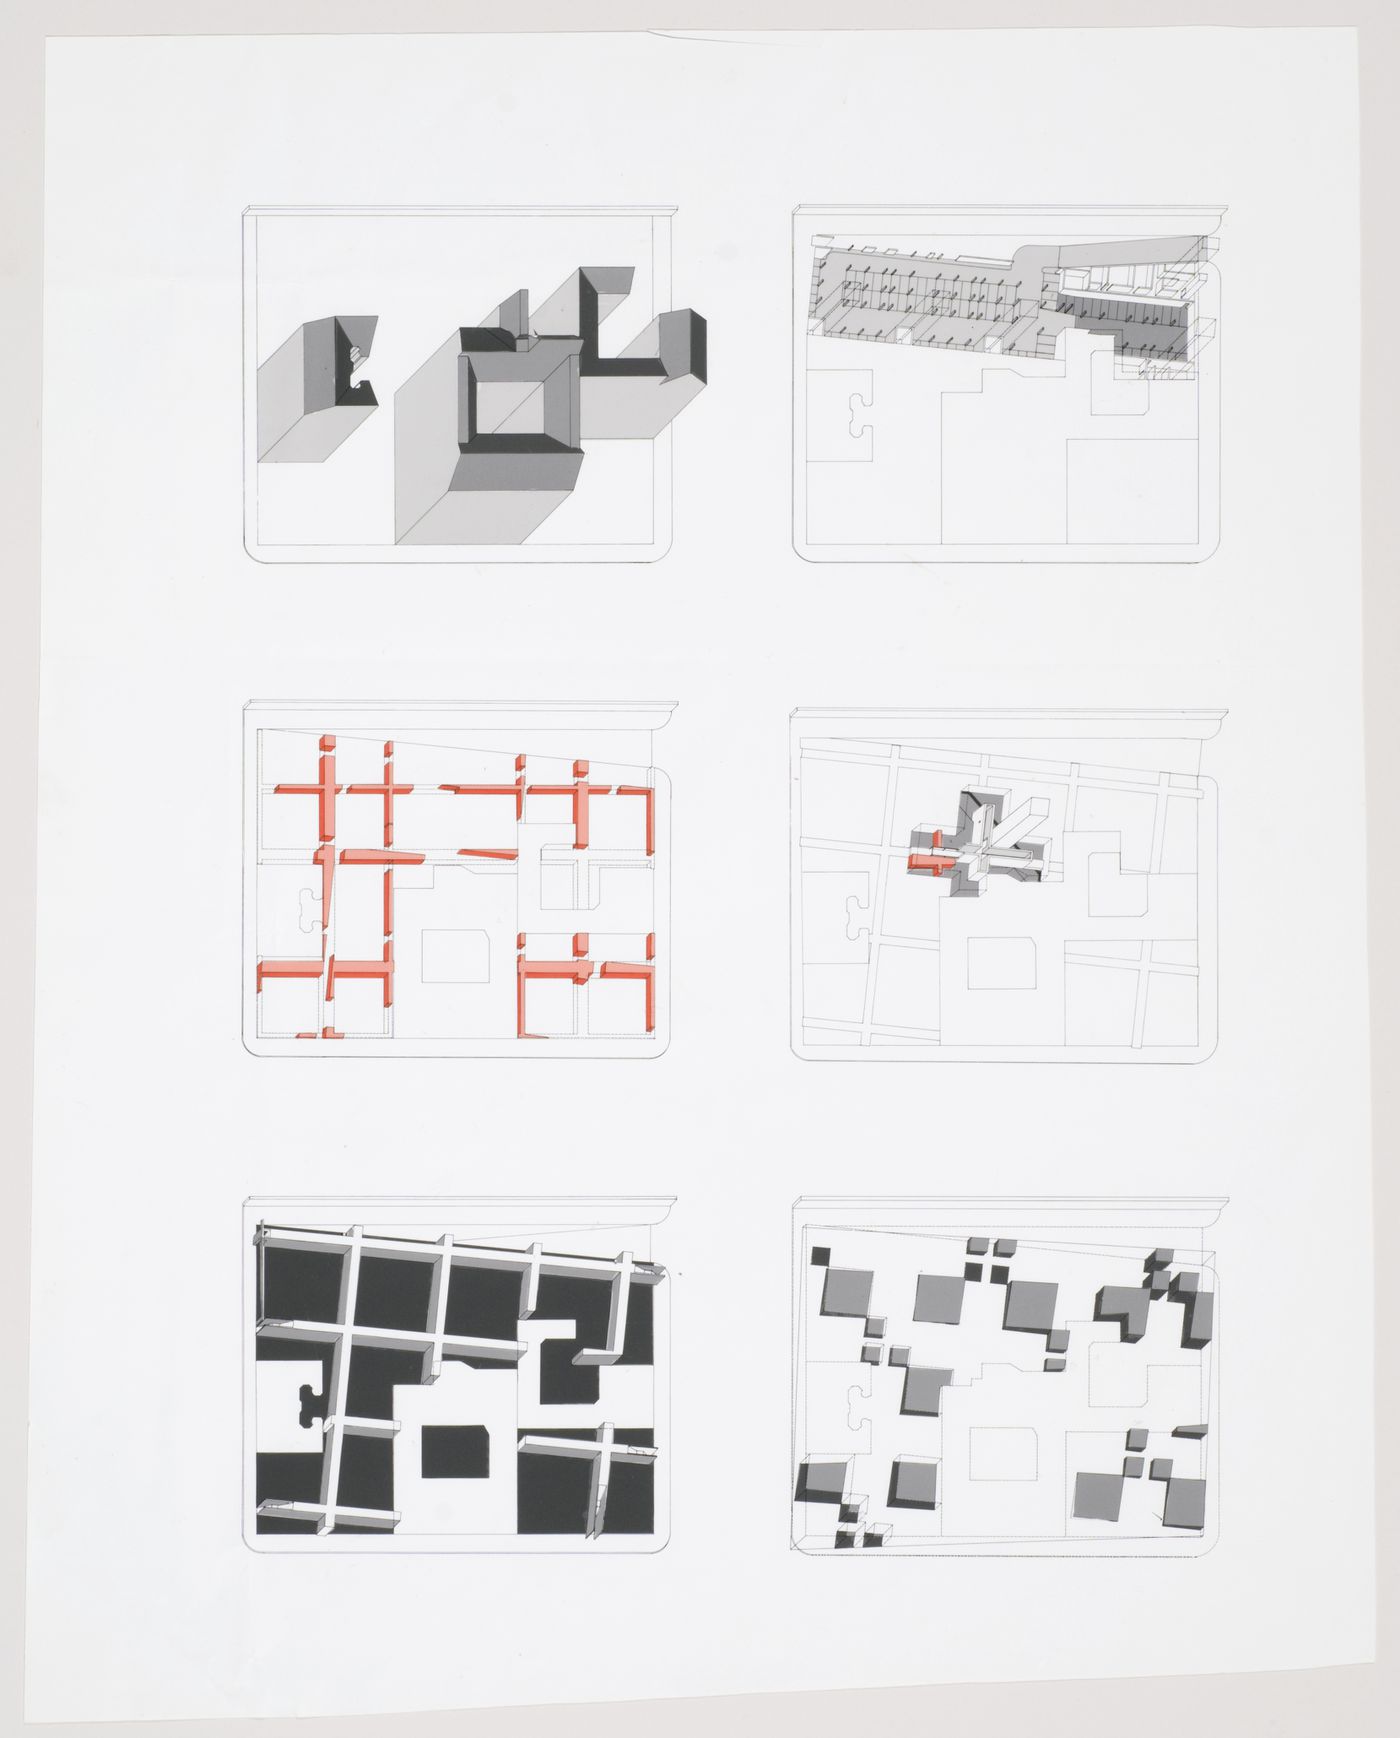 Site plans with axonometric projections, IBA project, West Berlin (now Berlin), West Germany (now Germany)